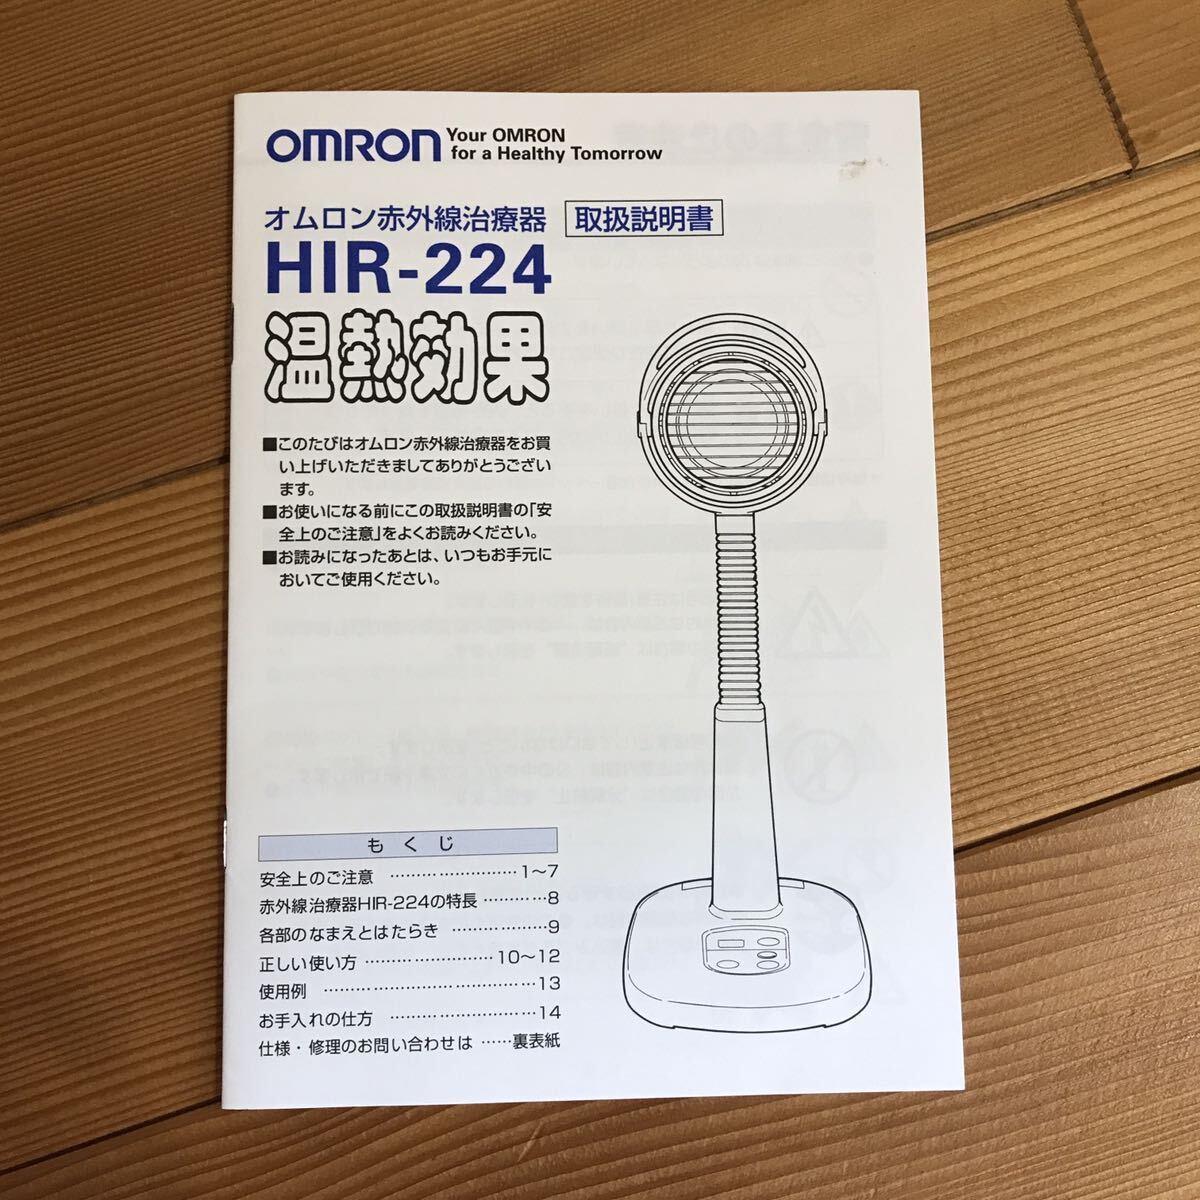  Omron infra-red rays therapeutics device HIR-224 operation verification ending 